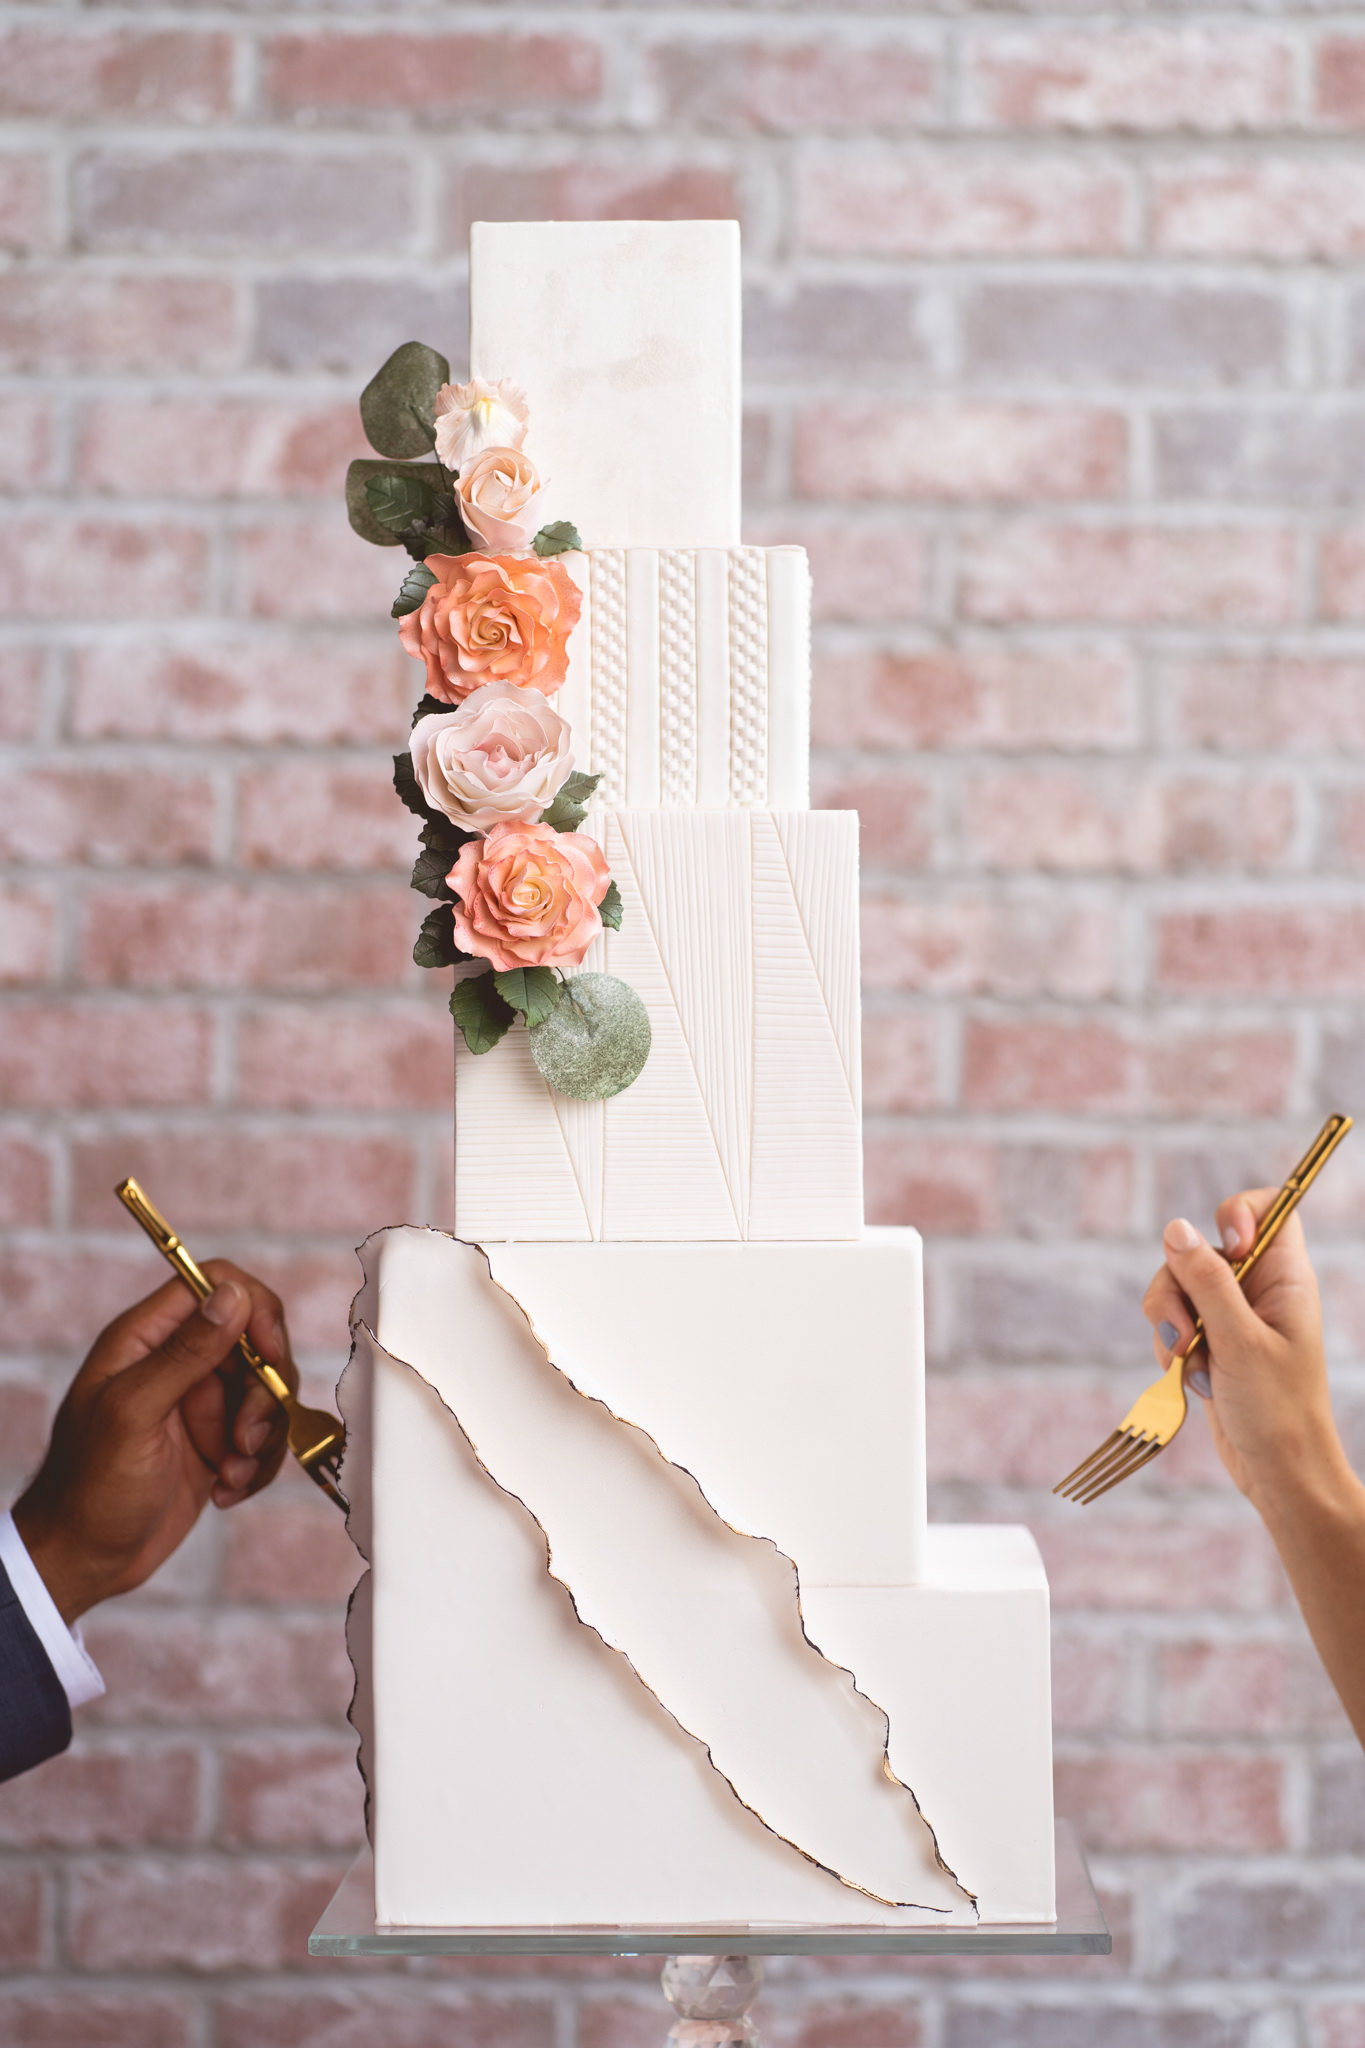 Five Tiered Square Artistic Wedding Cake with Textured Design and Sugar Flower Accents by Tampa Wedding Bakery The Artistic Whisk